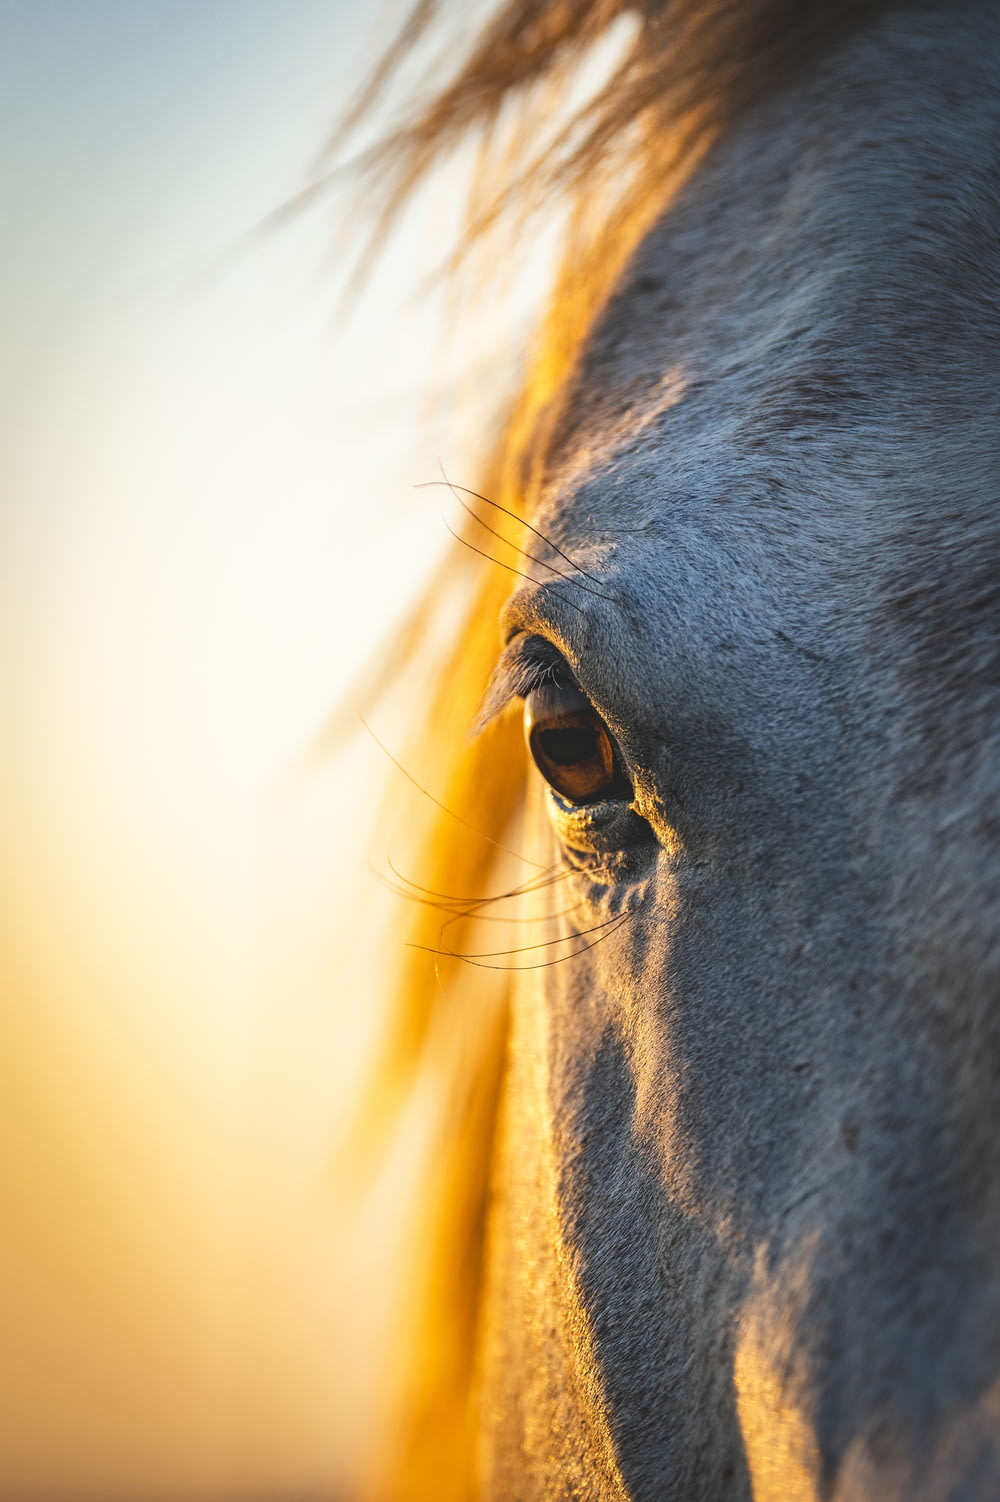 a close up of a horse's face with the sun in the background